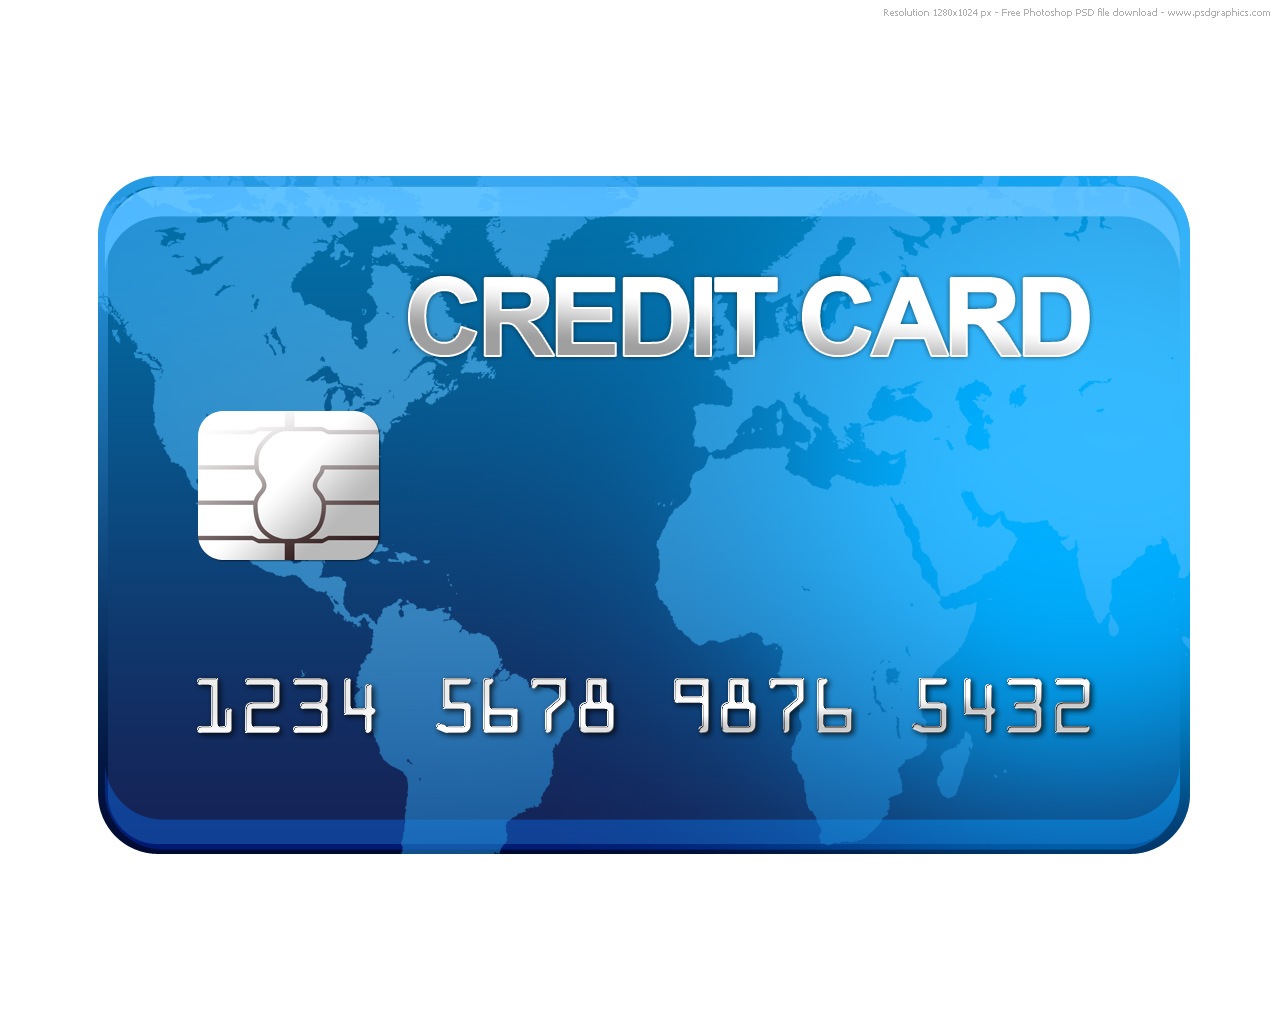 Do’s and Don’ts to avoid Credit Card Fraud